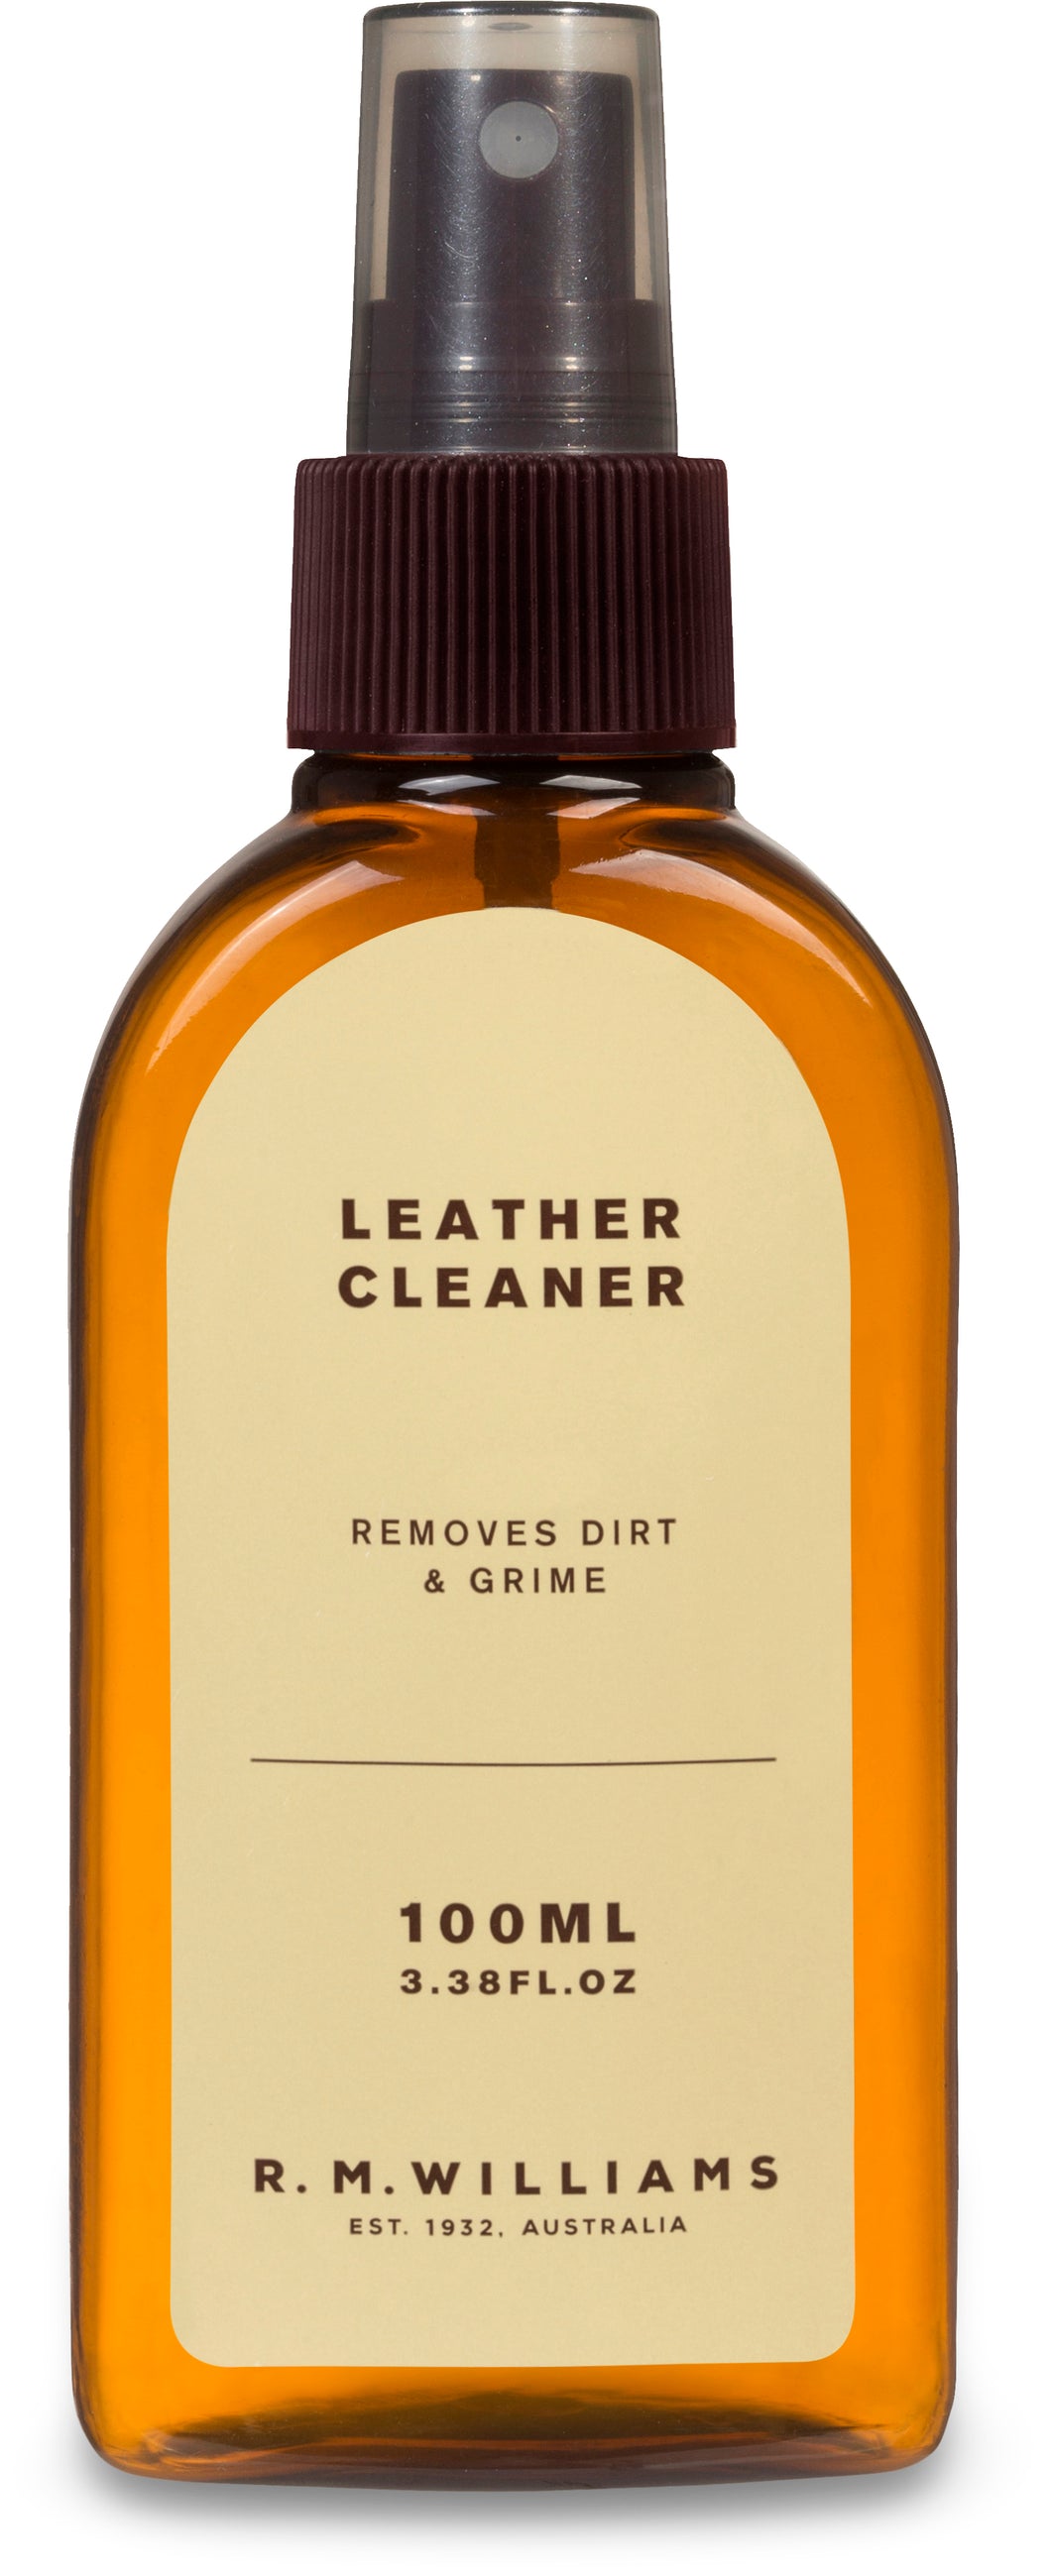 R.M.W Leather Cleaner